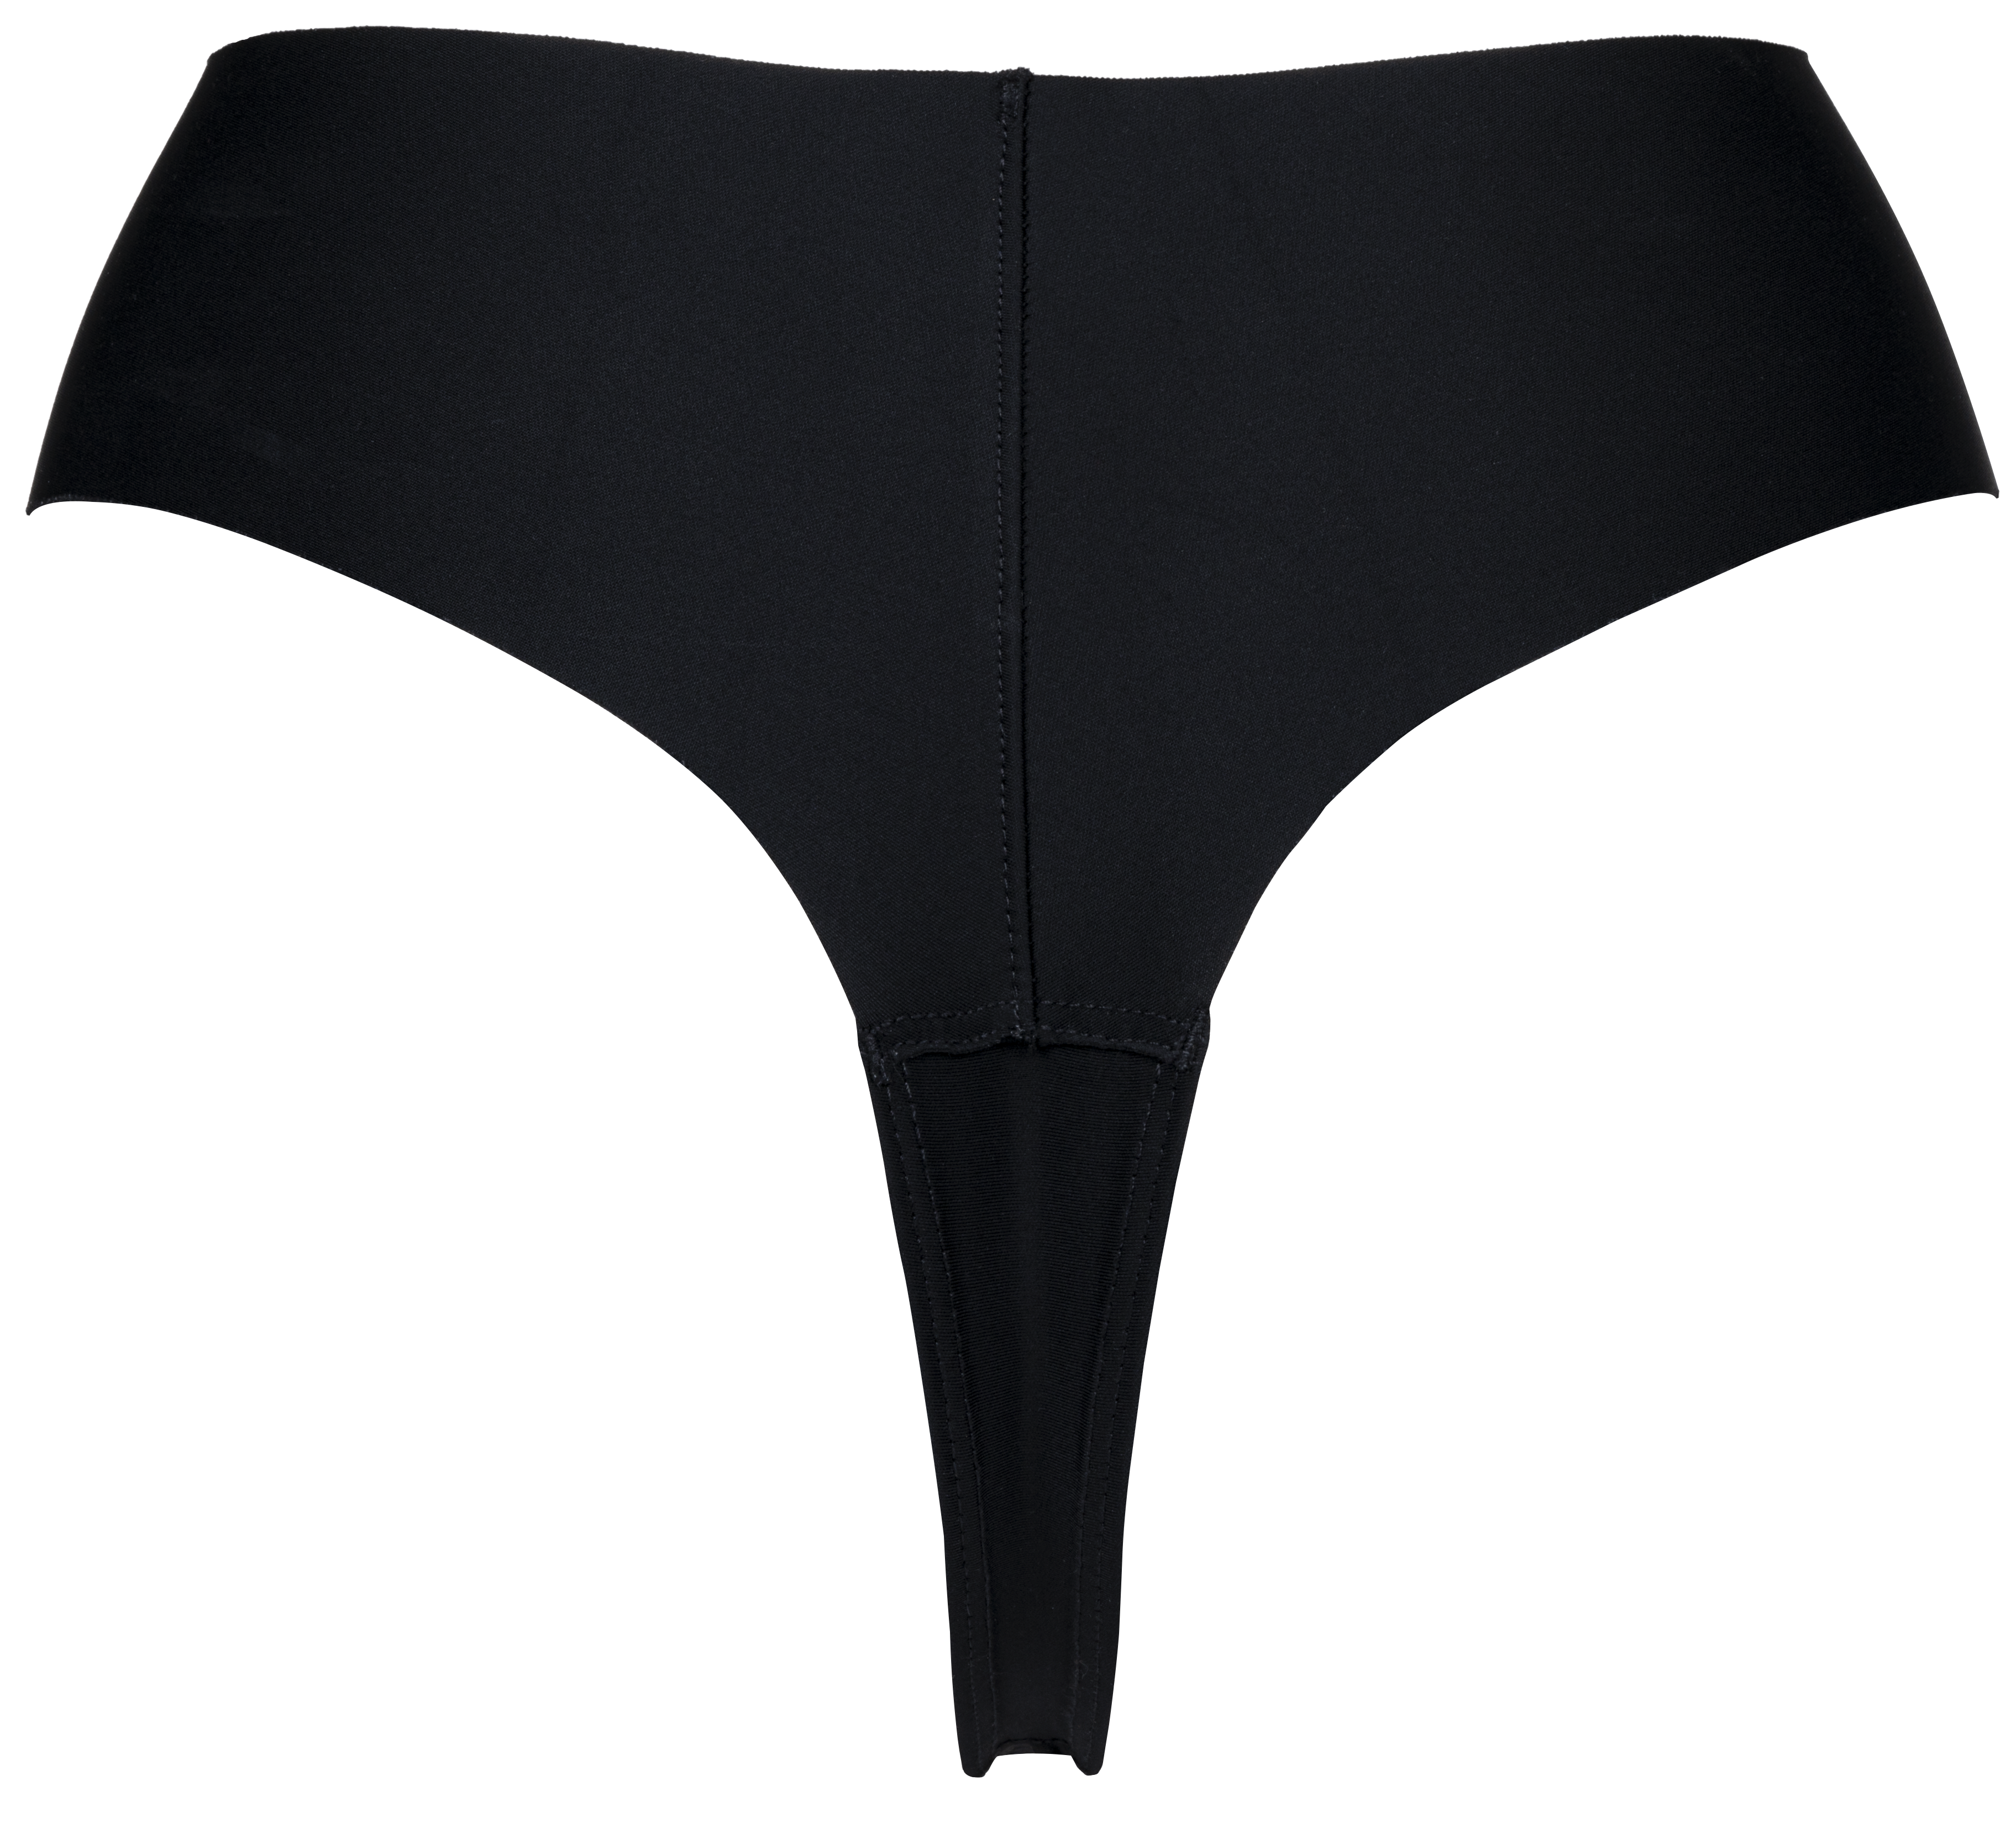 JIV ATHLETICS The Cameltoe Proof Mid Rise Thong in Sand